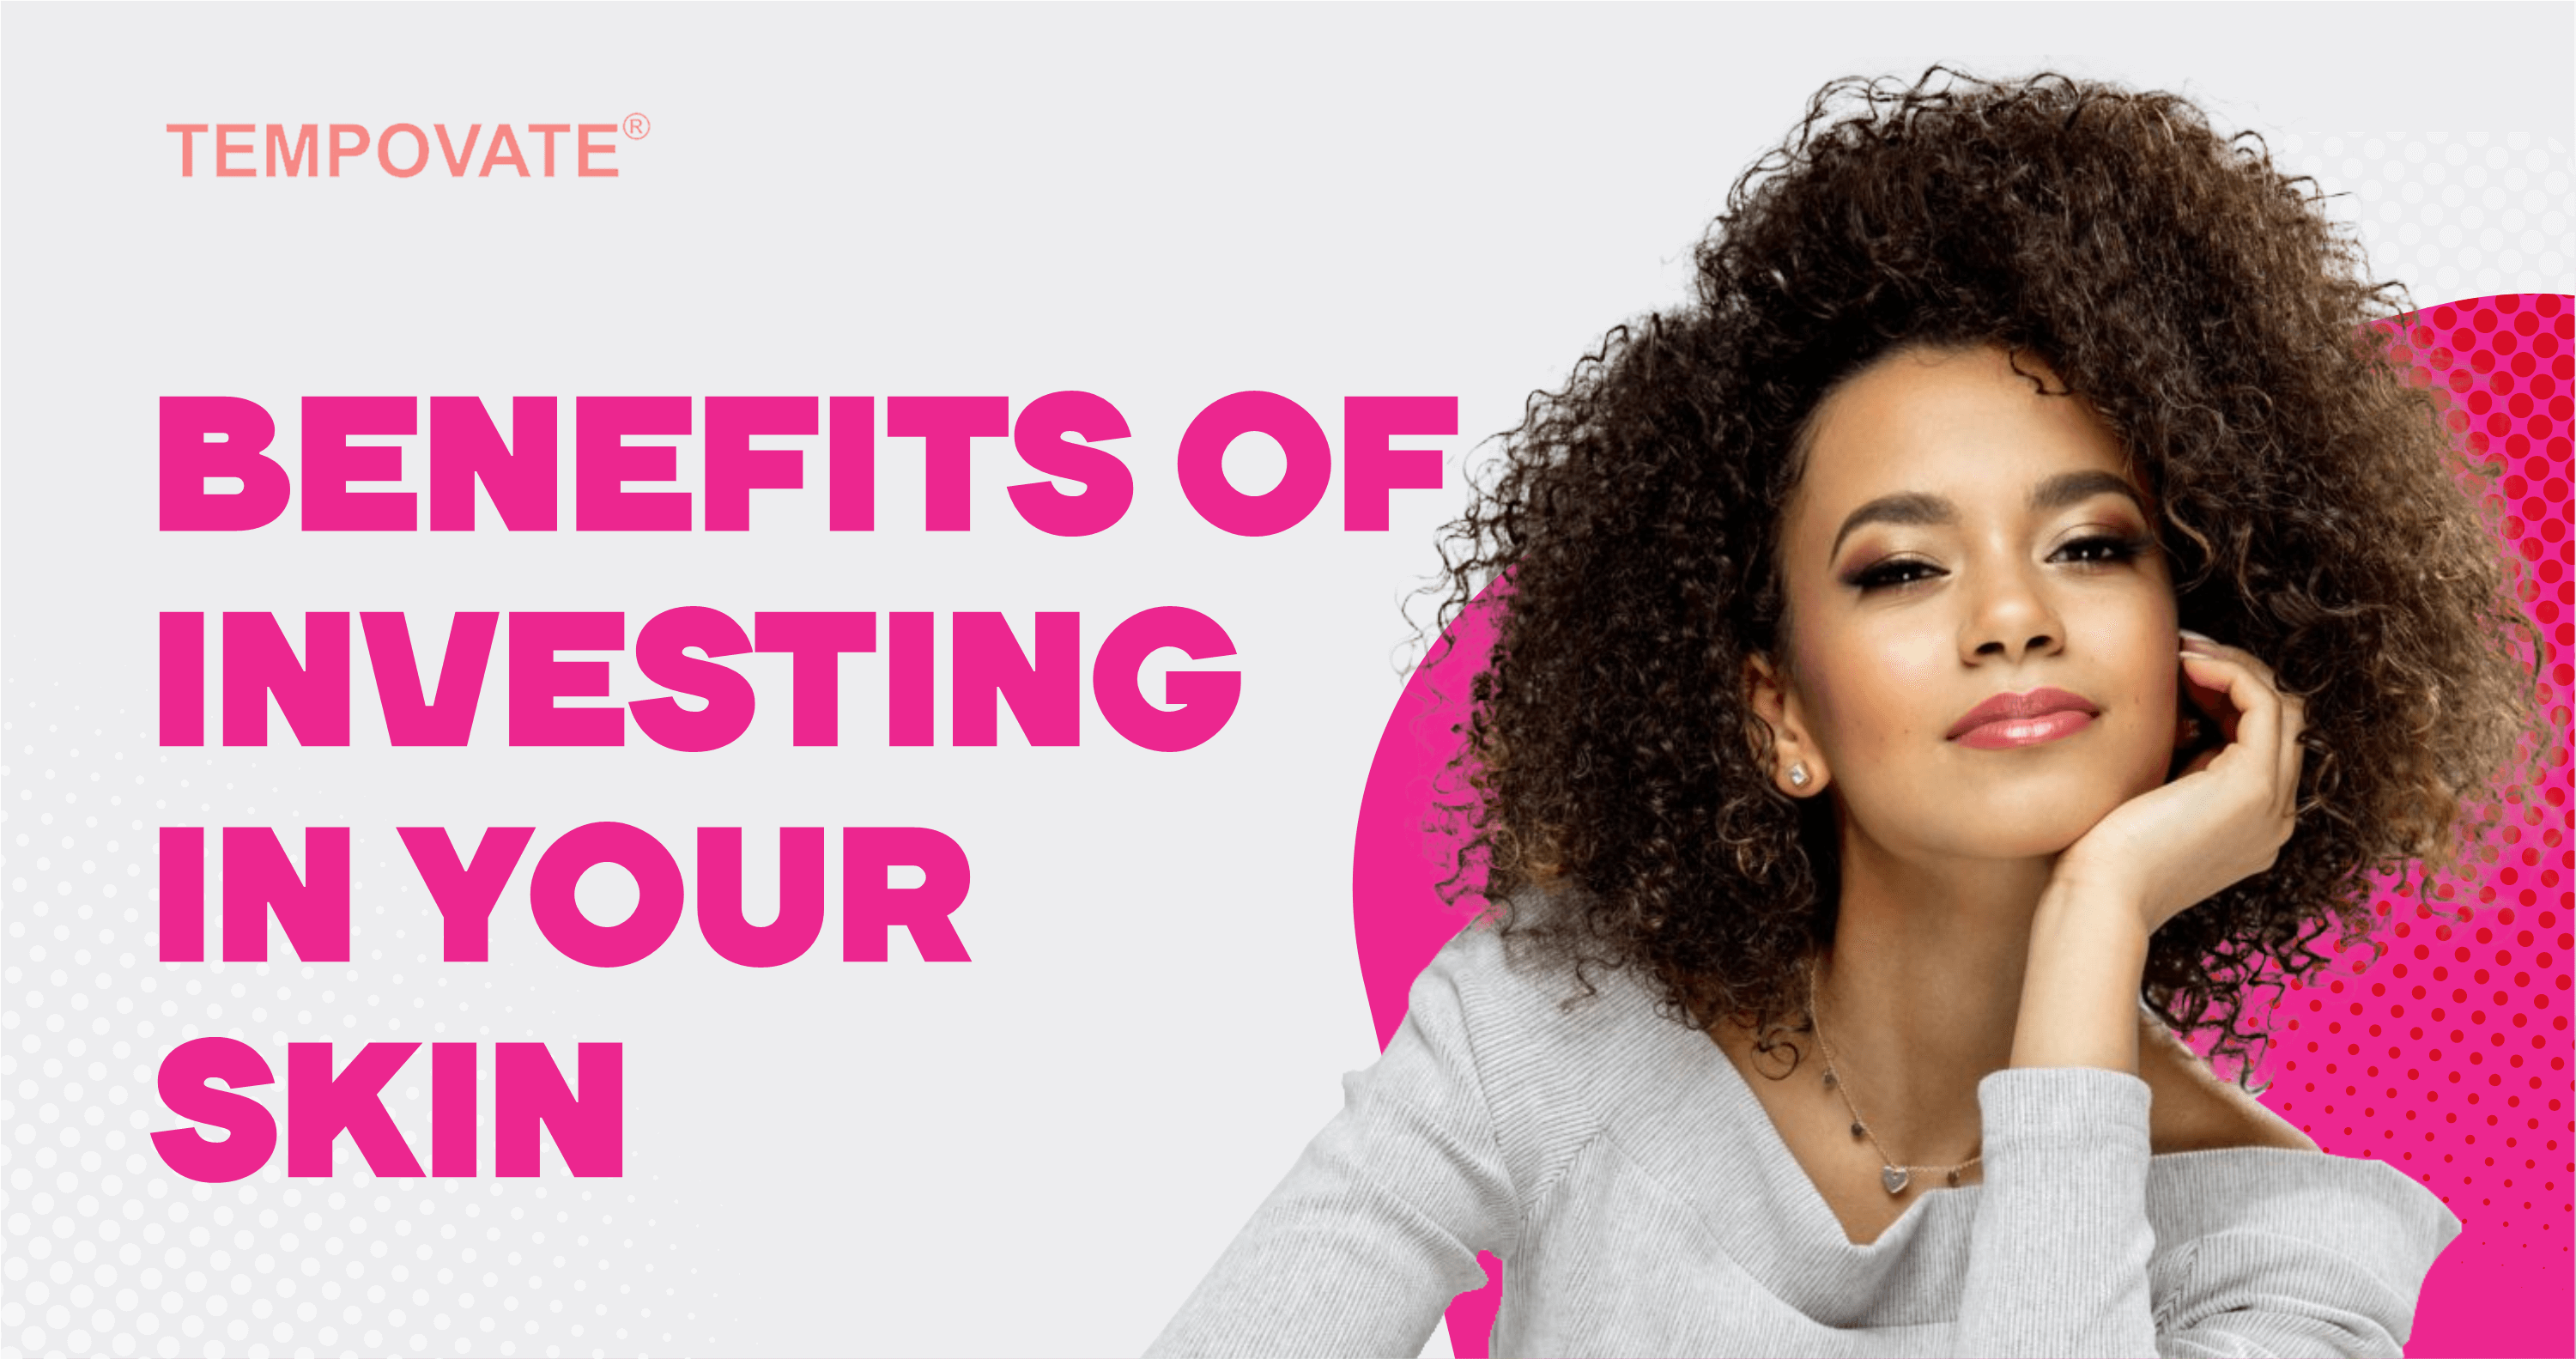 Benefits of Investing In Your Skin